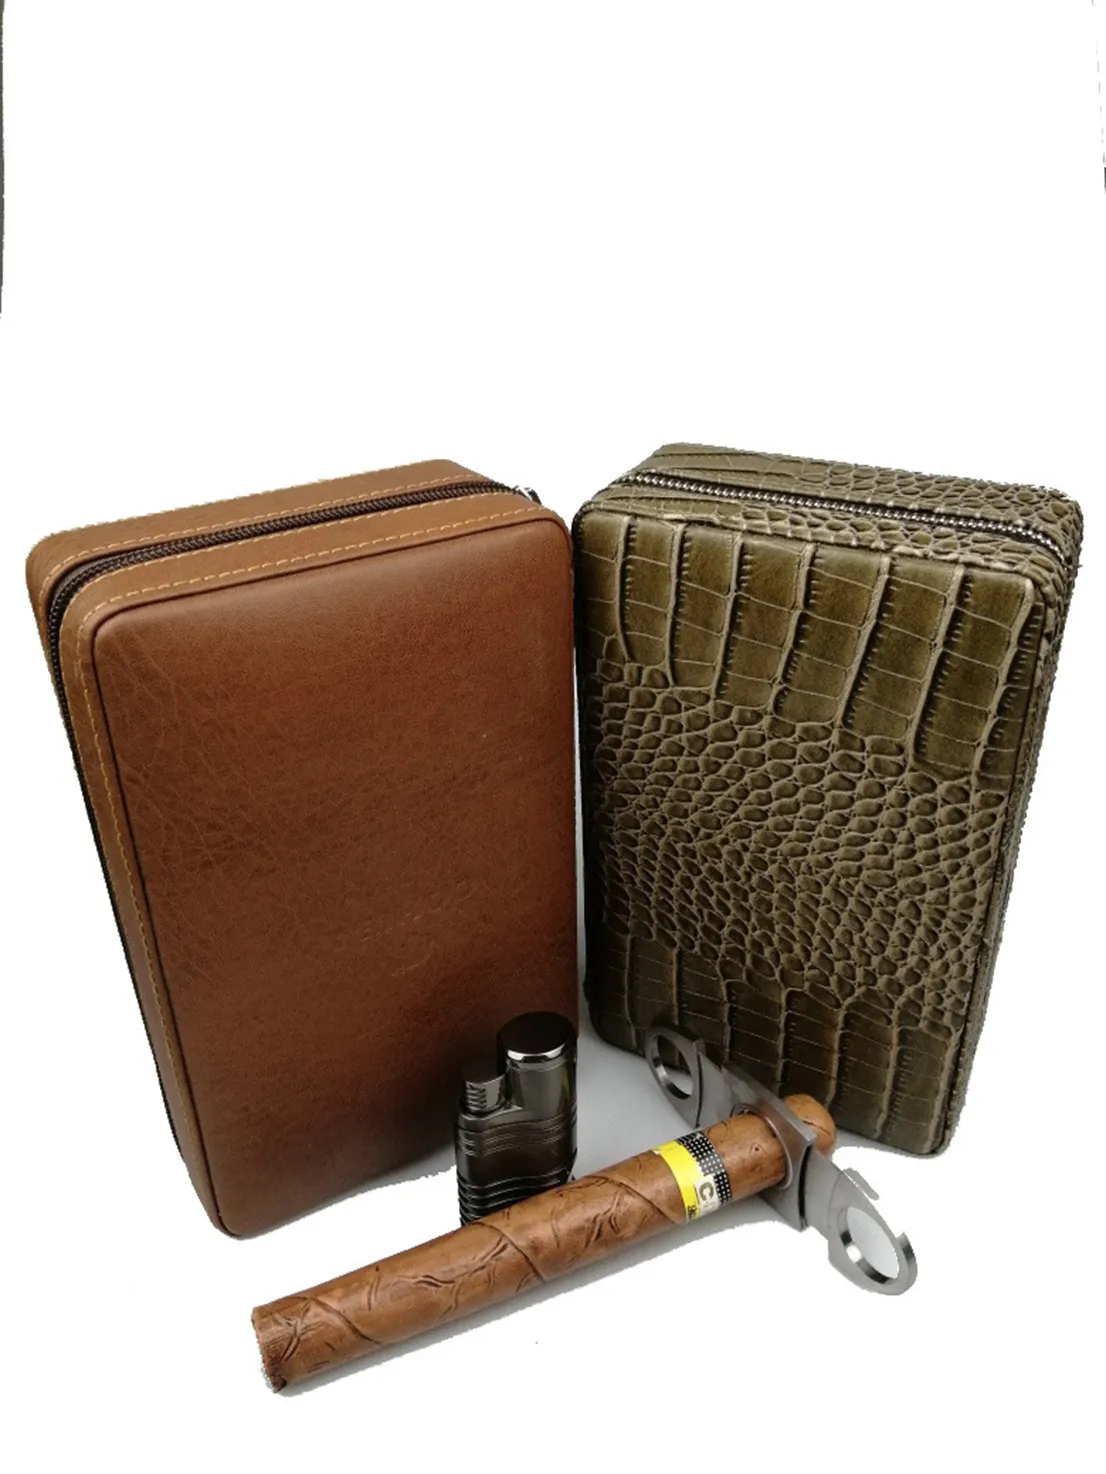 custom Spot Cuban cigar sleeve delivered cigar scissors portable Gohiba humidor Cowhide travel pack storage bag suitcase Bags, Luggages & Accessories crocodile box 1